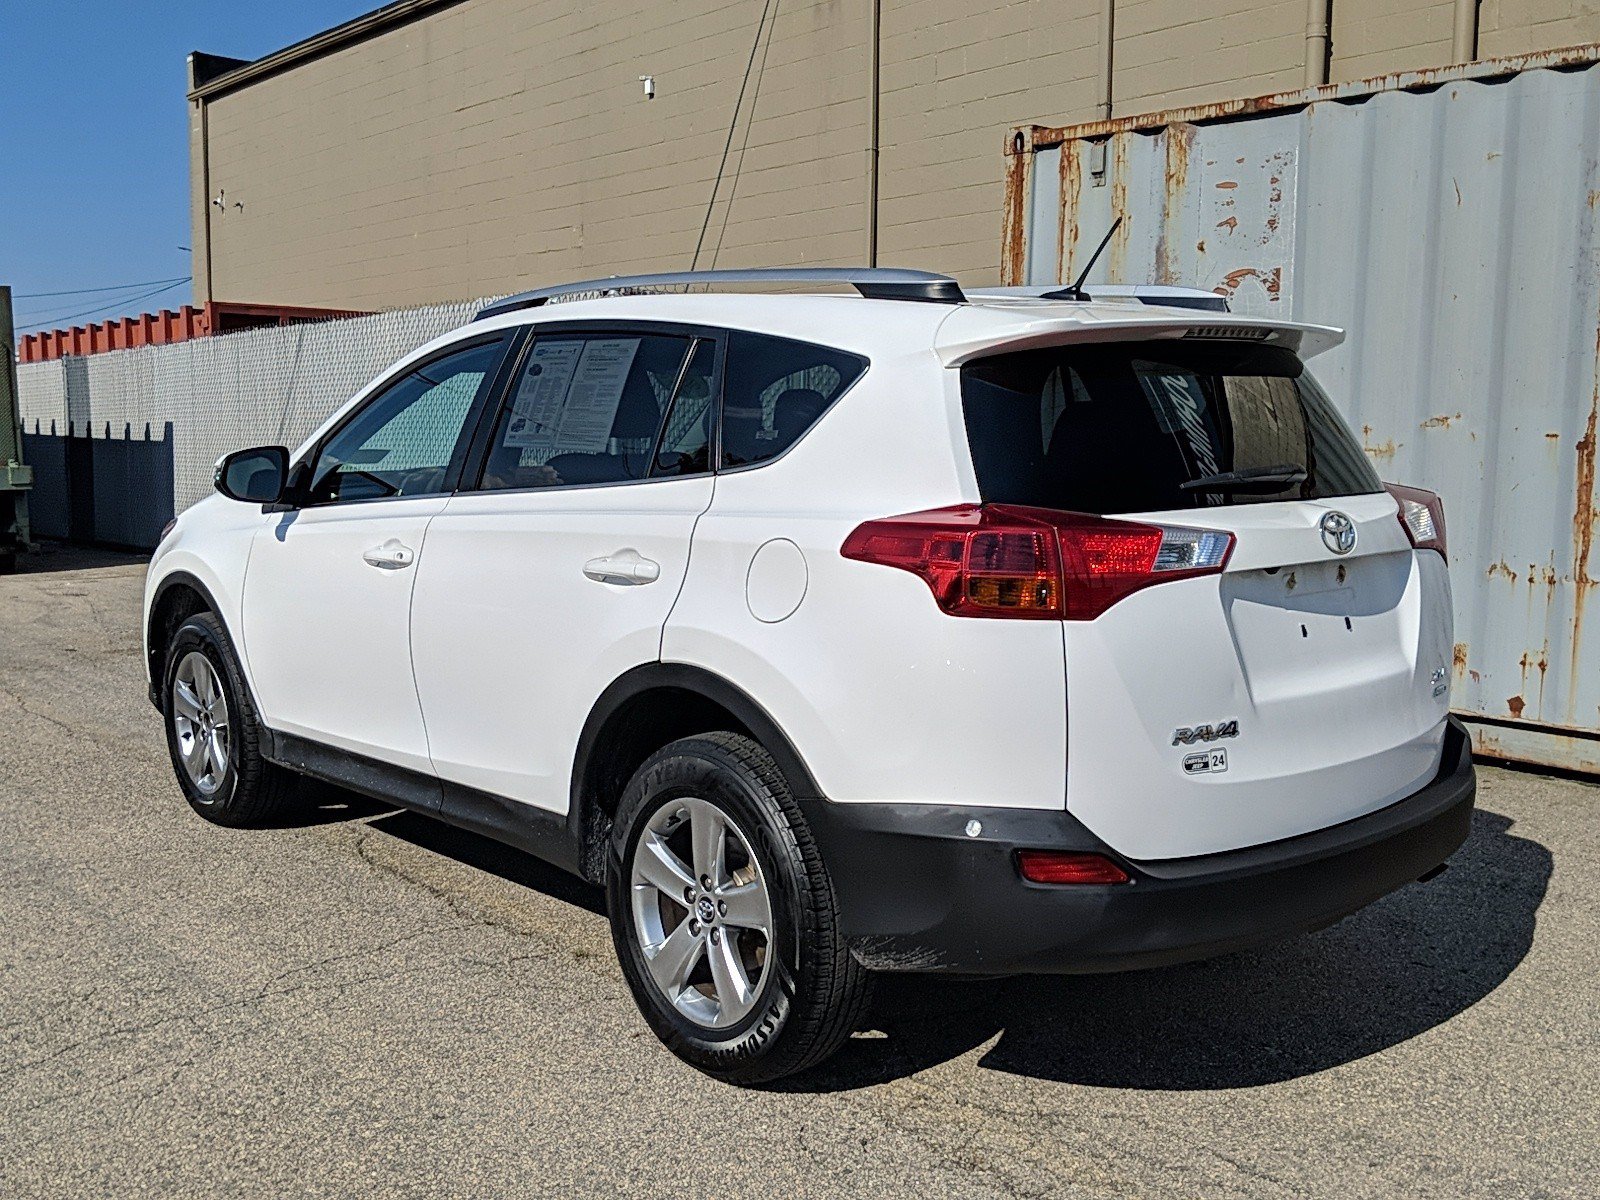 Pre-Owned 2015 Toyota RAV4 XLE for Sale Mansfield #J10054A | Station